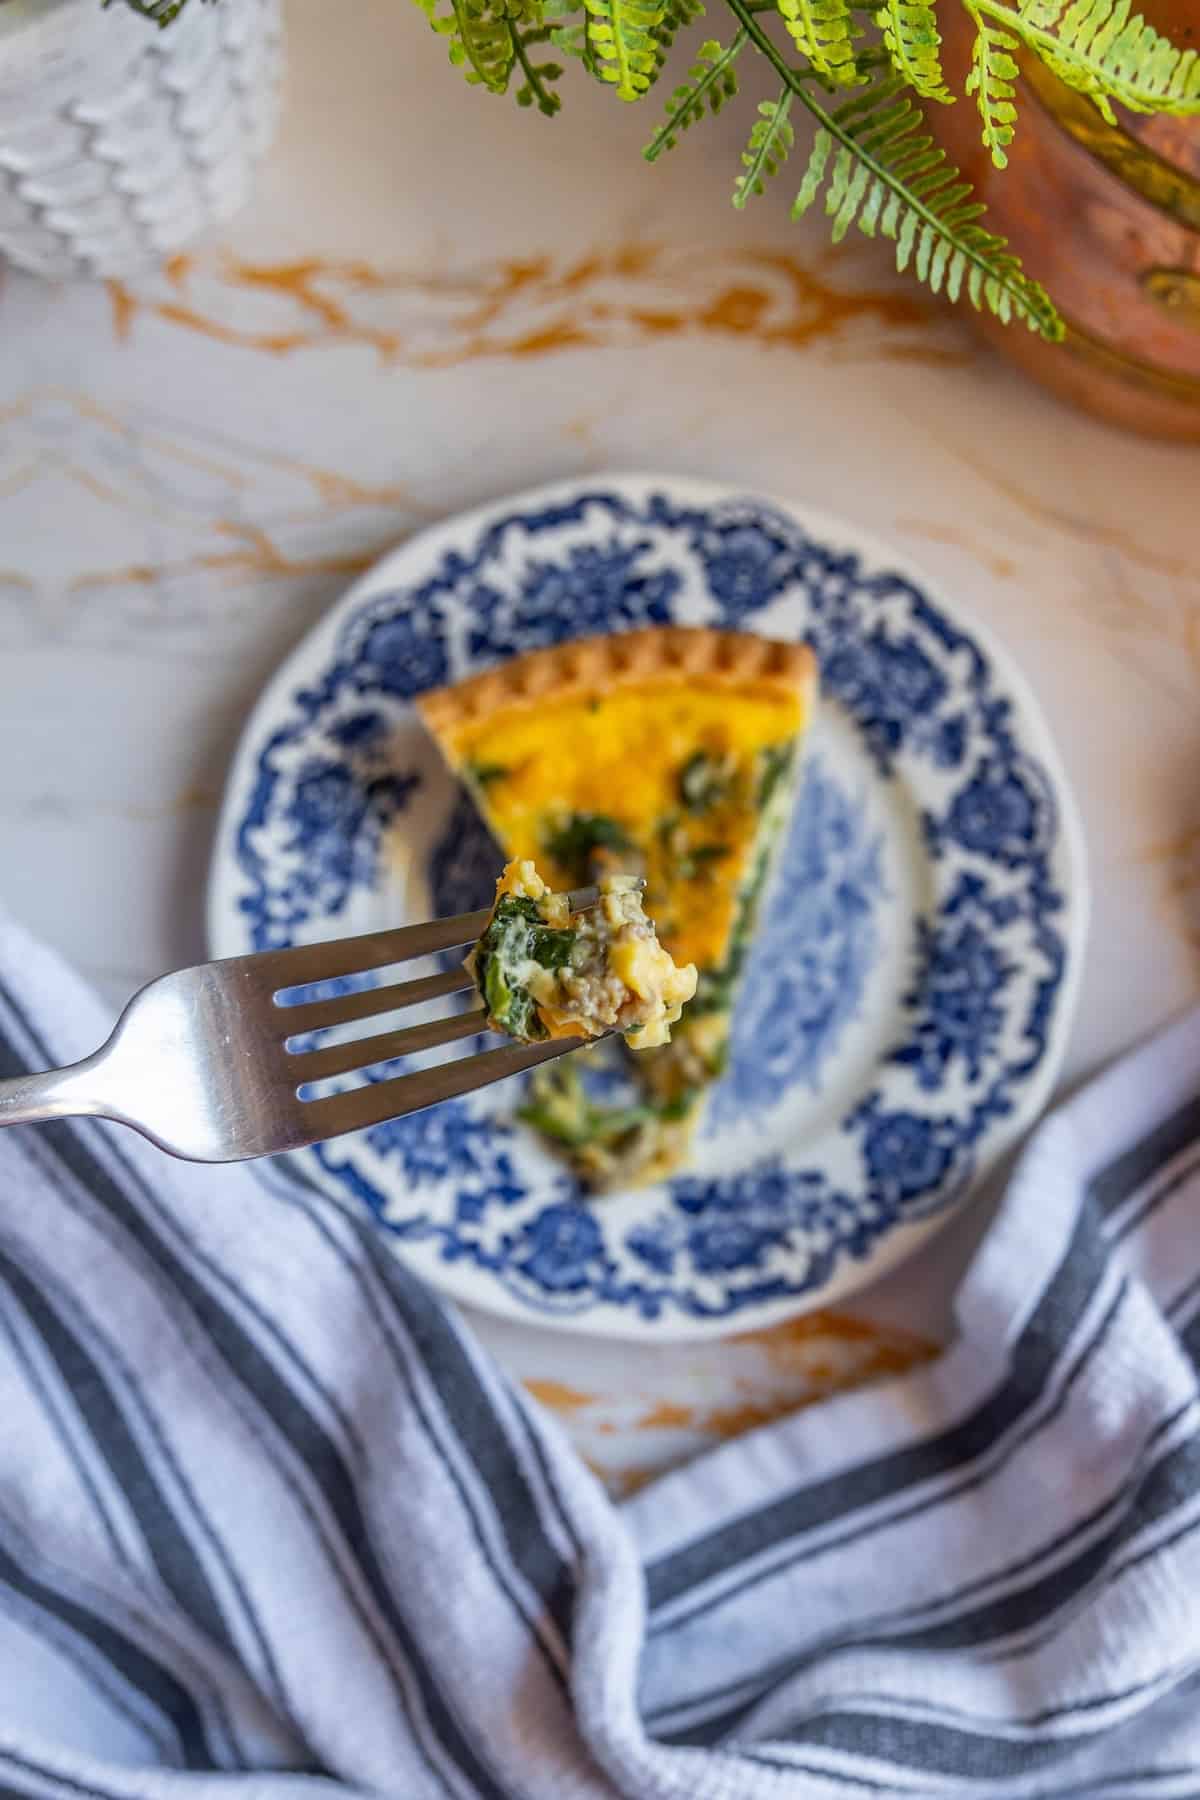 A quiche slice on a plate with a fork.